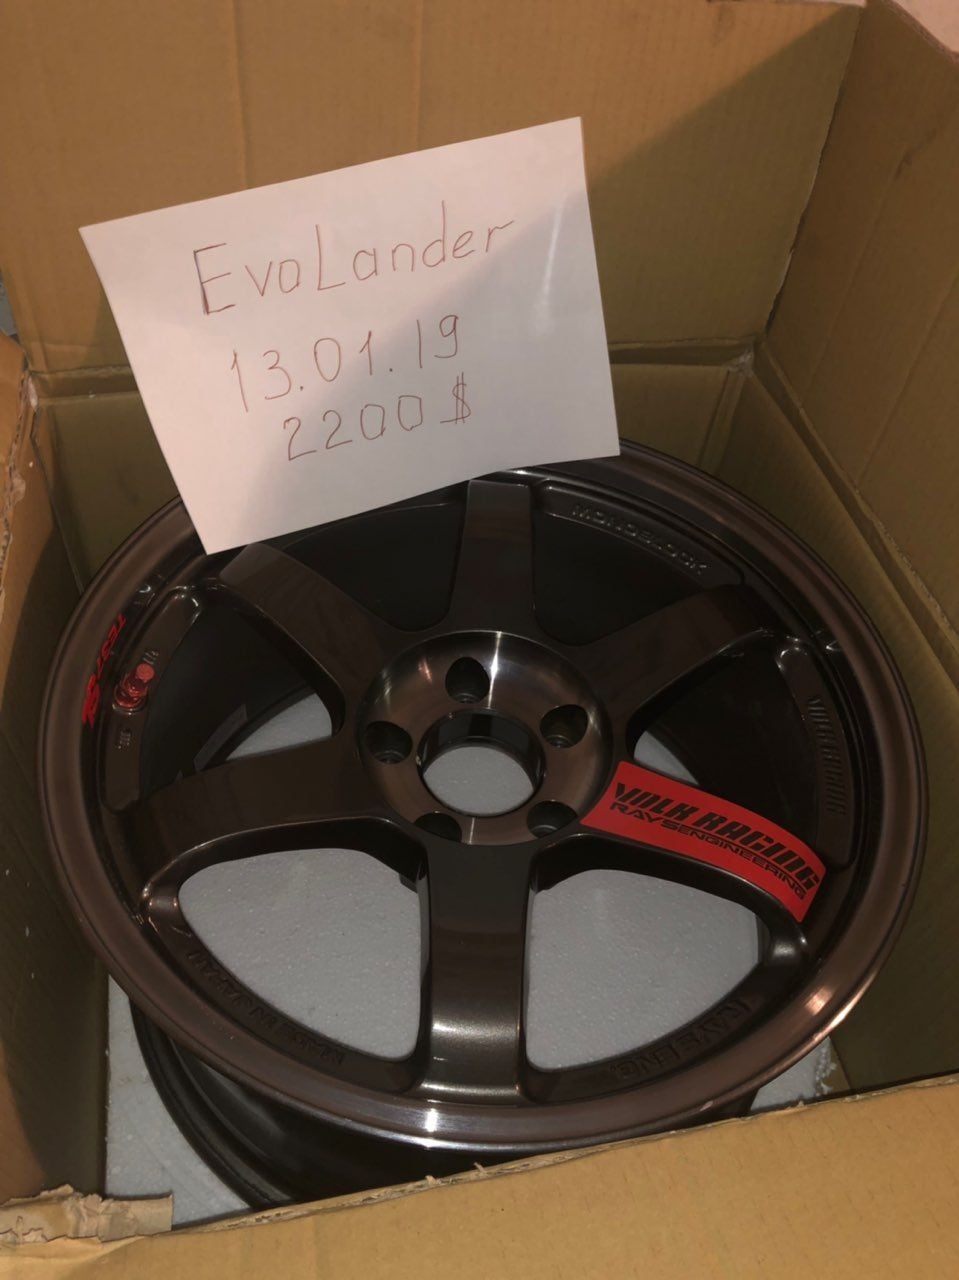 Wheels and Tires/Axles - For Sale: Rays TE37SL R17x9.5  +12 [5x114.3] - Used - 2006 to 2012 Mitsubishi Lancer Evolution - Kaluga, Russian Federation